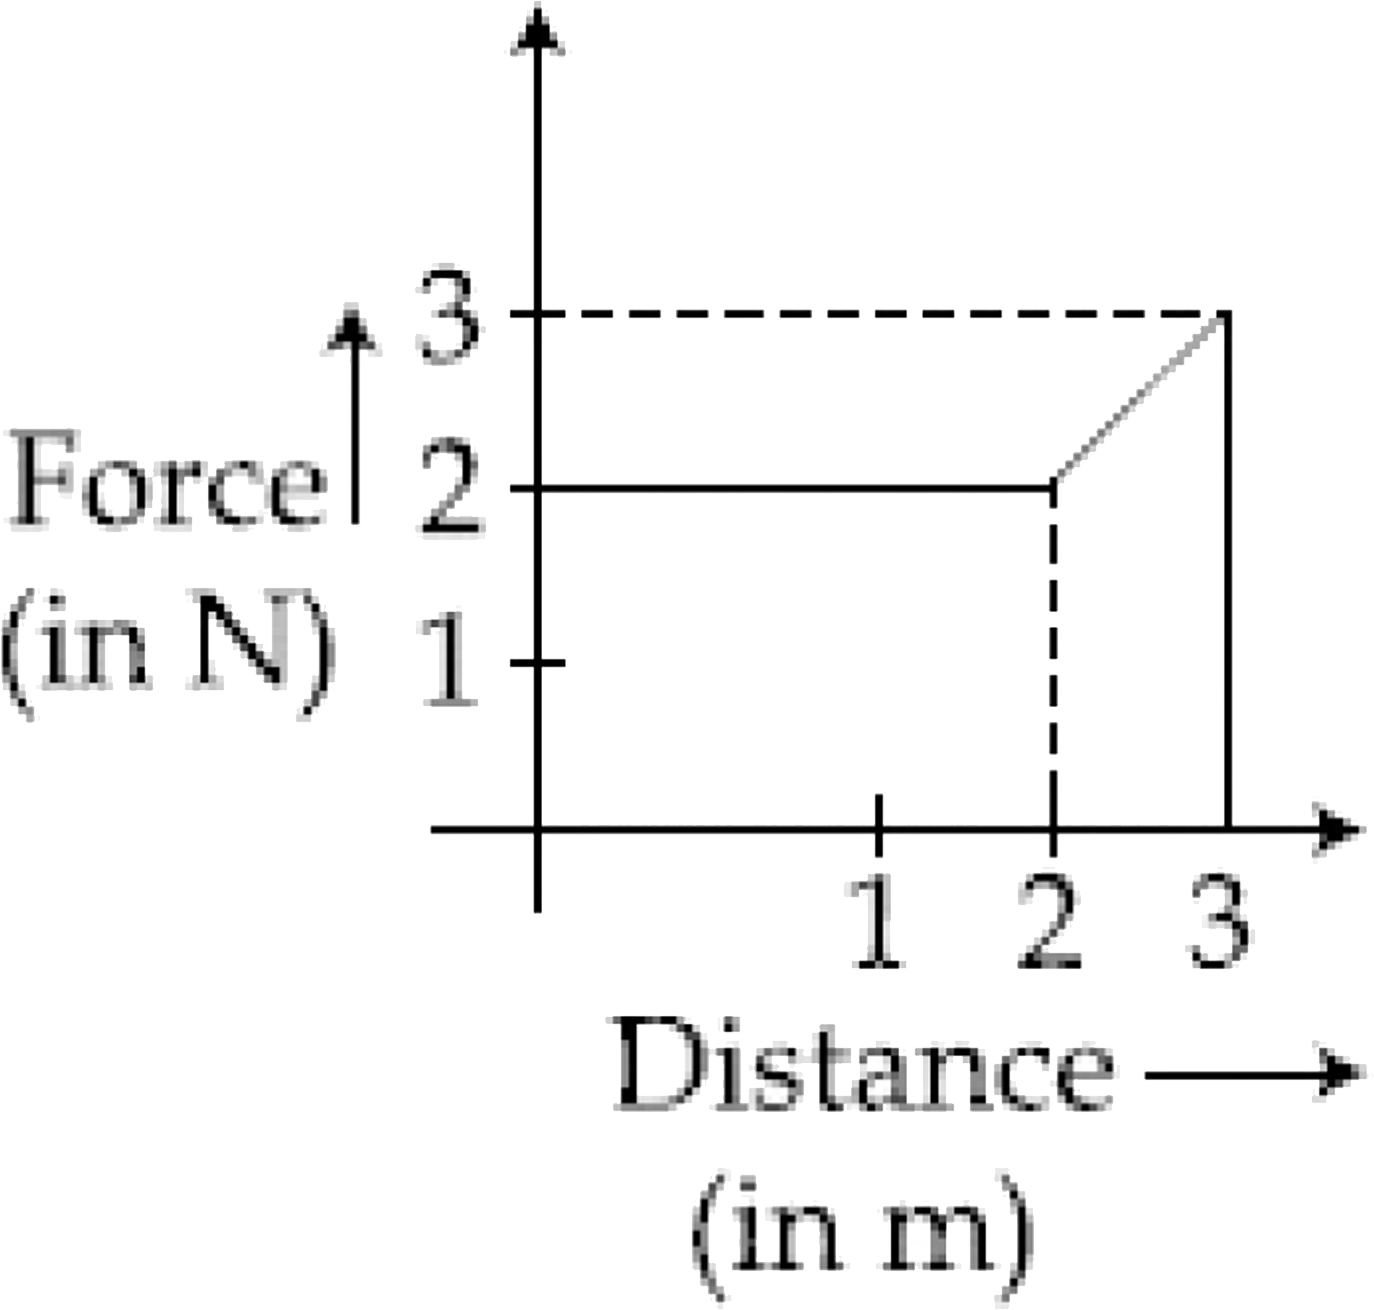 A particle moves in one dimension from rest under the influence of a force that varies with the distance travelled by the particle as shown in the figure. The kinetic energy of the particle after it has travelled 3m is: